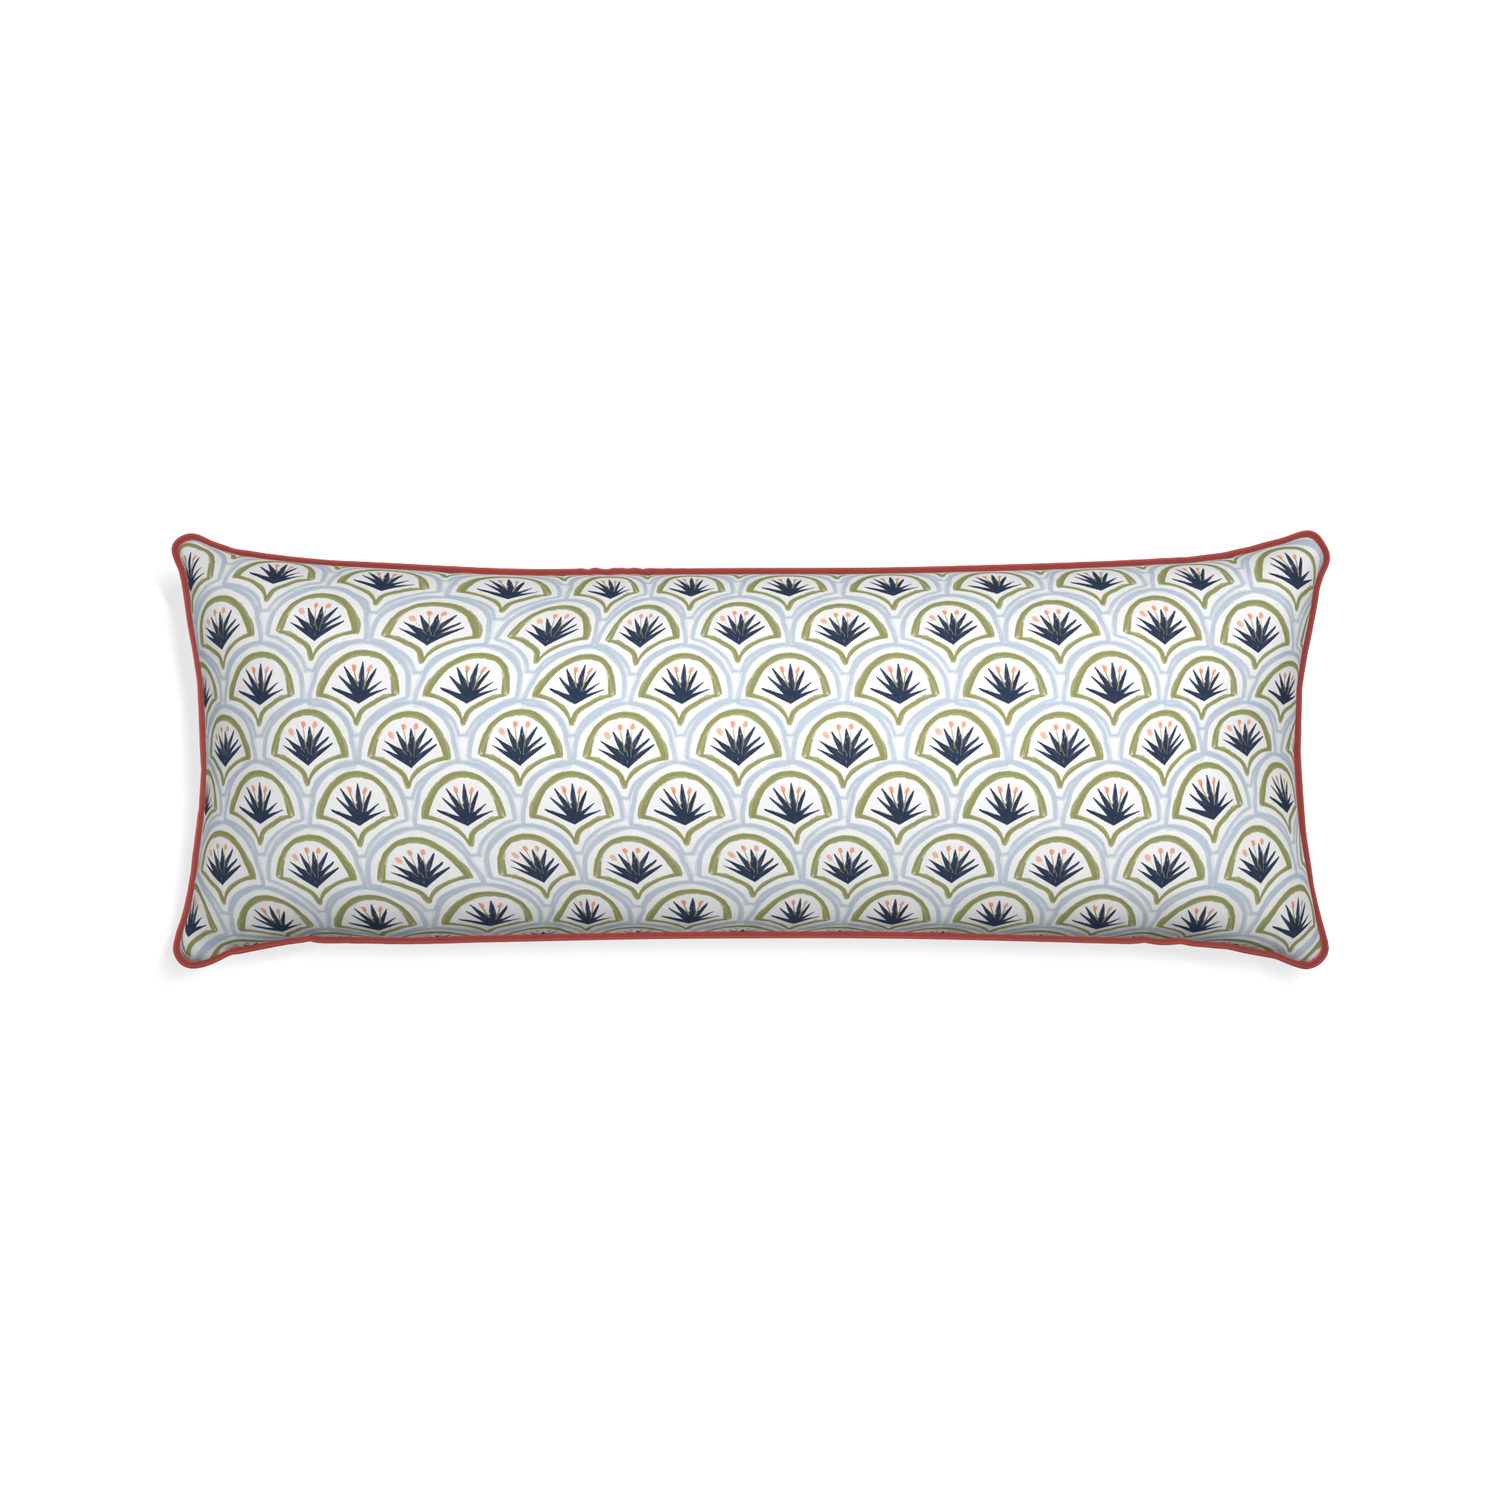 Xl-lumbar thatcher midnight custom art deco palm patternpillow with c piping on white background